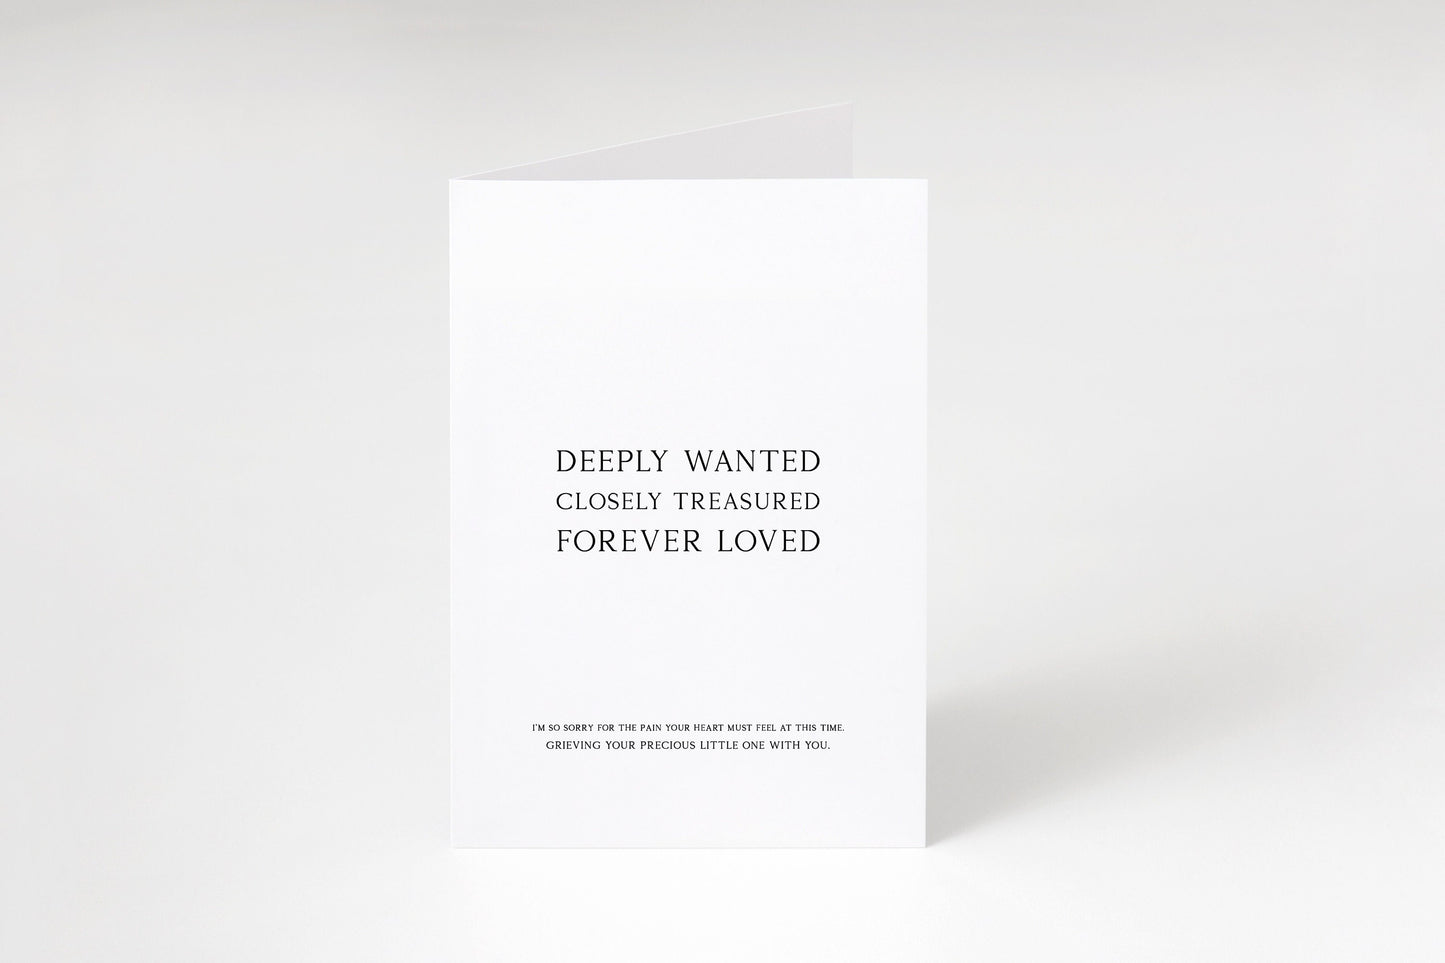 Deeply wanted closely treasured forever loved,Miscarriage card,Bereavement card,Condolence card,Sorry for your loss,Grief,Loss of child card